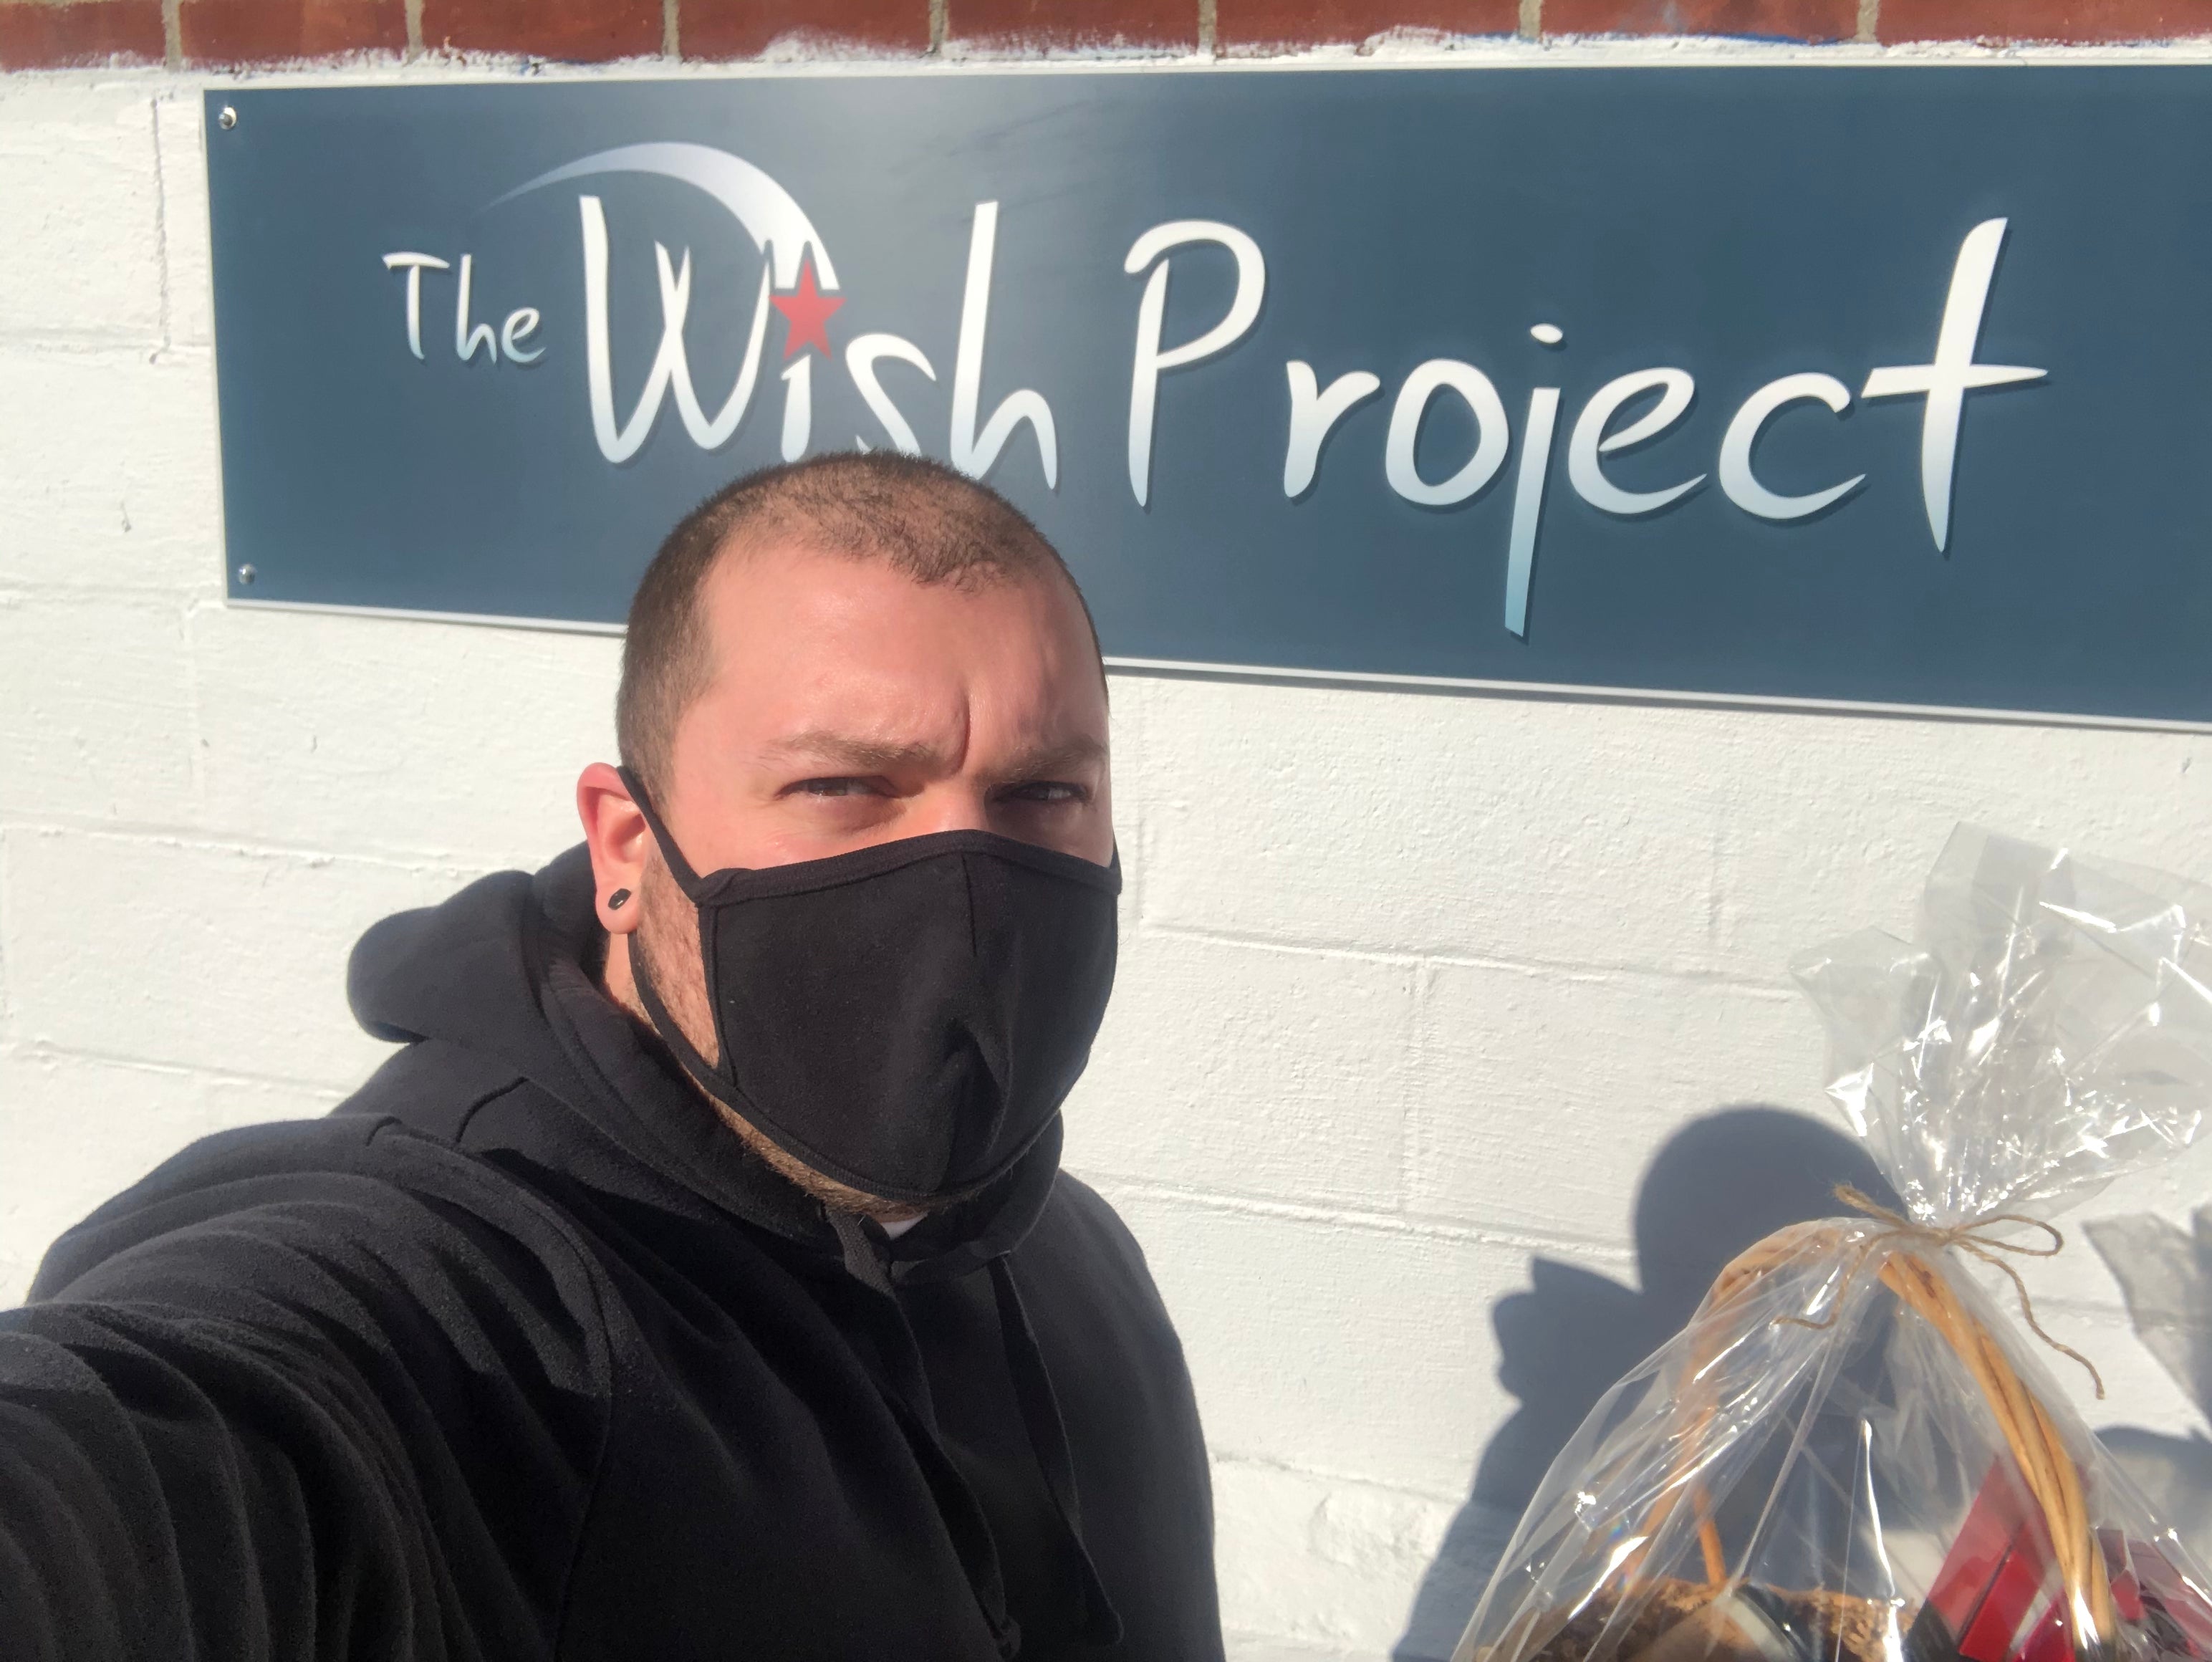 Fern x Flow owner, Joe Wing, in front of The Wish Project's sign outside their Chelmsford, MA location.